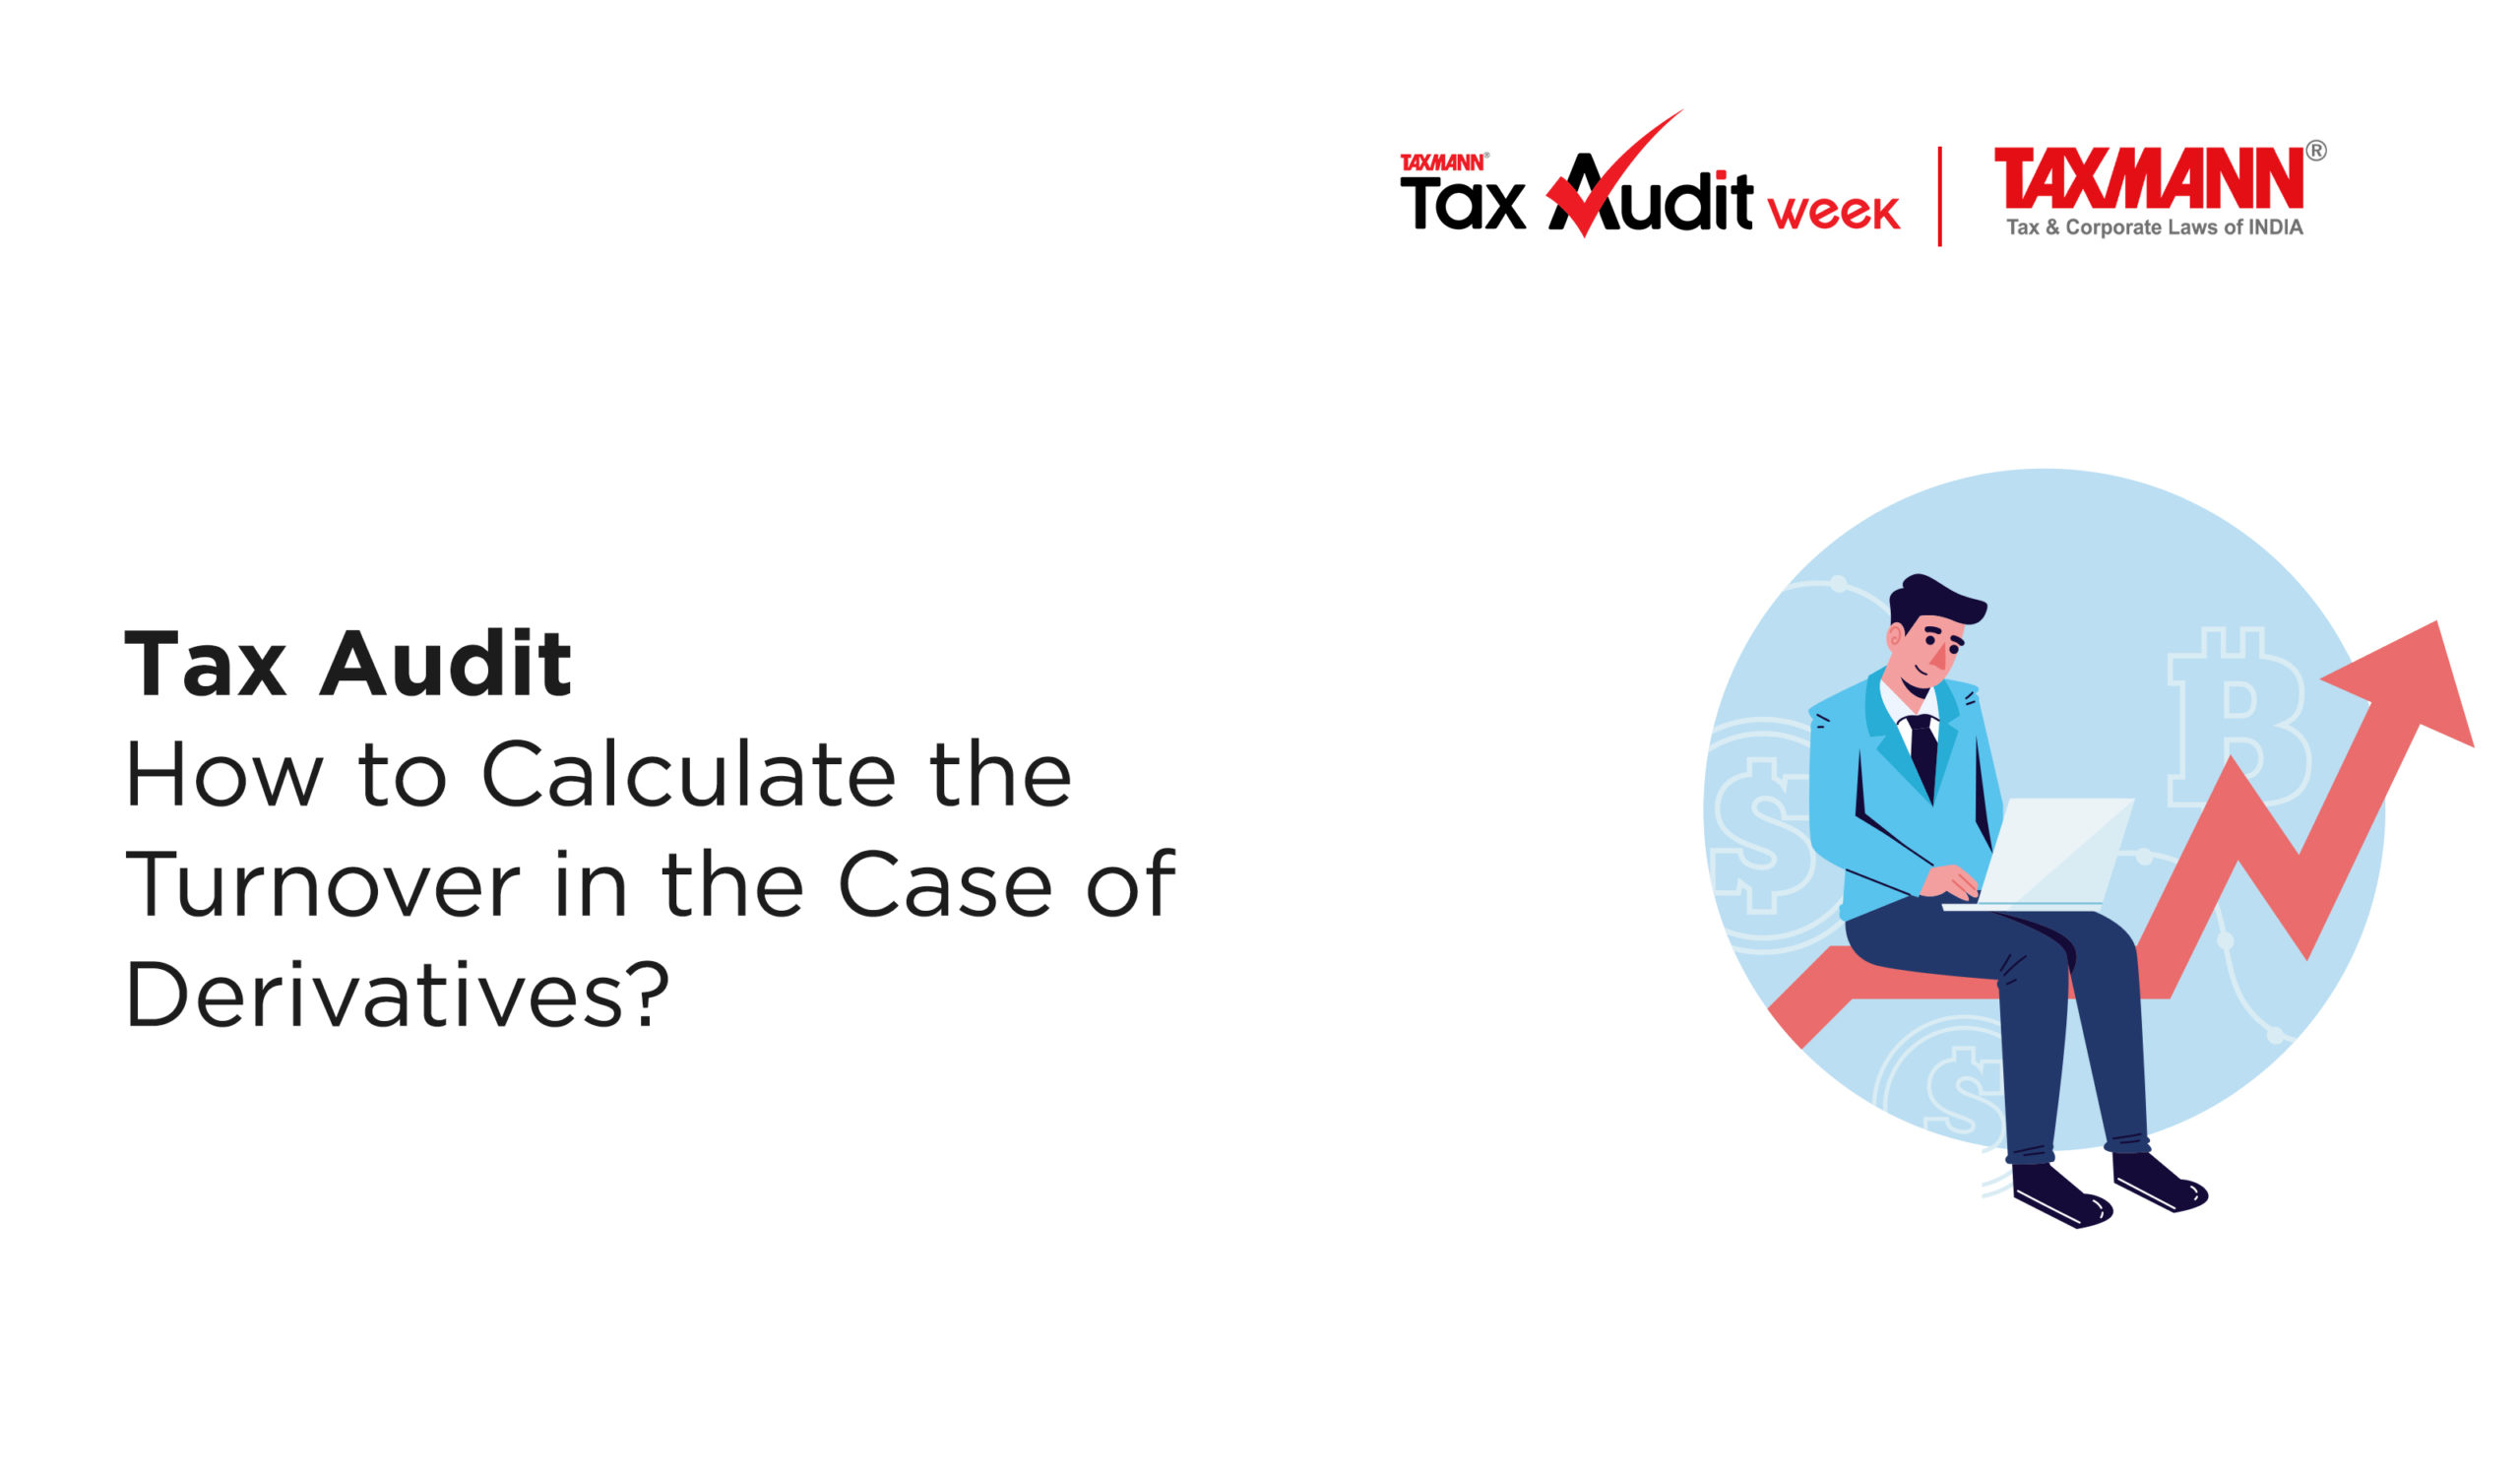 Turnover Calculation in the Case of Derivatives